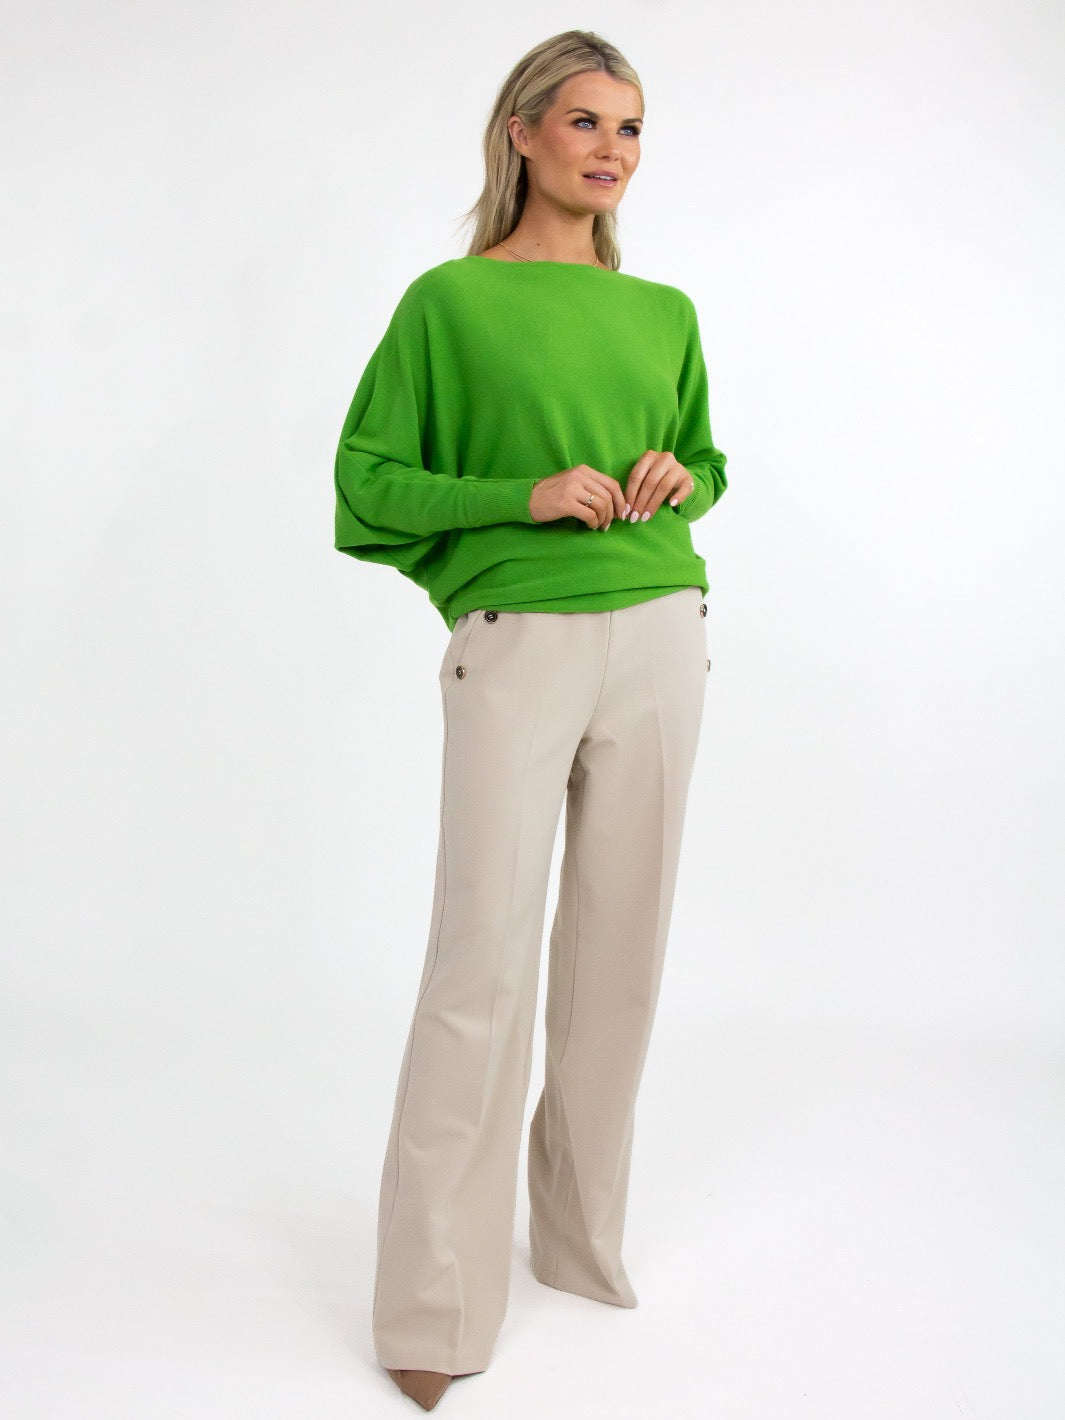 Kate & Pippa Milano Batwing Knit In Lime Green-Nicola Ross